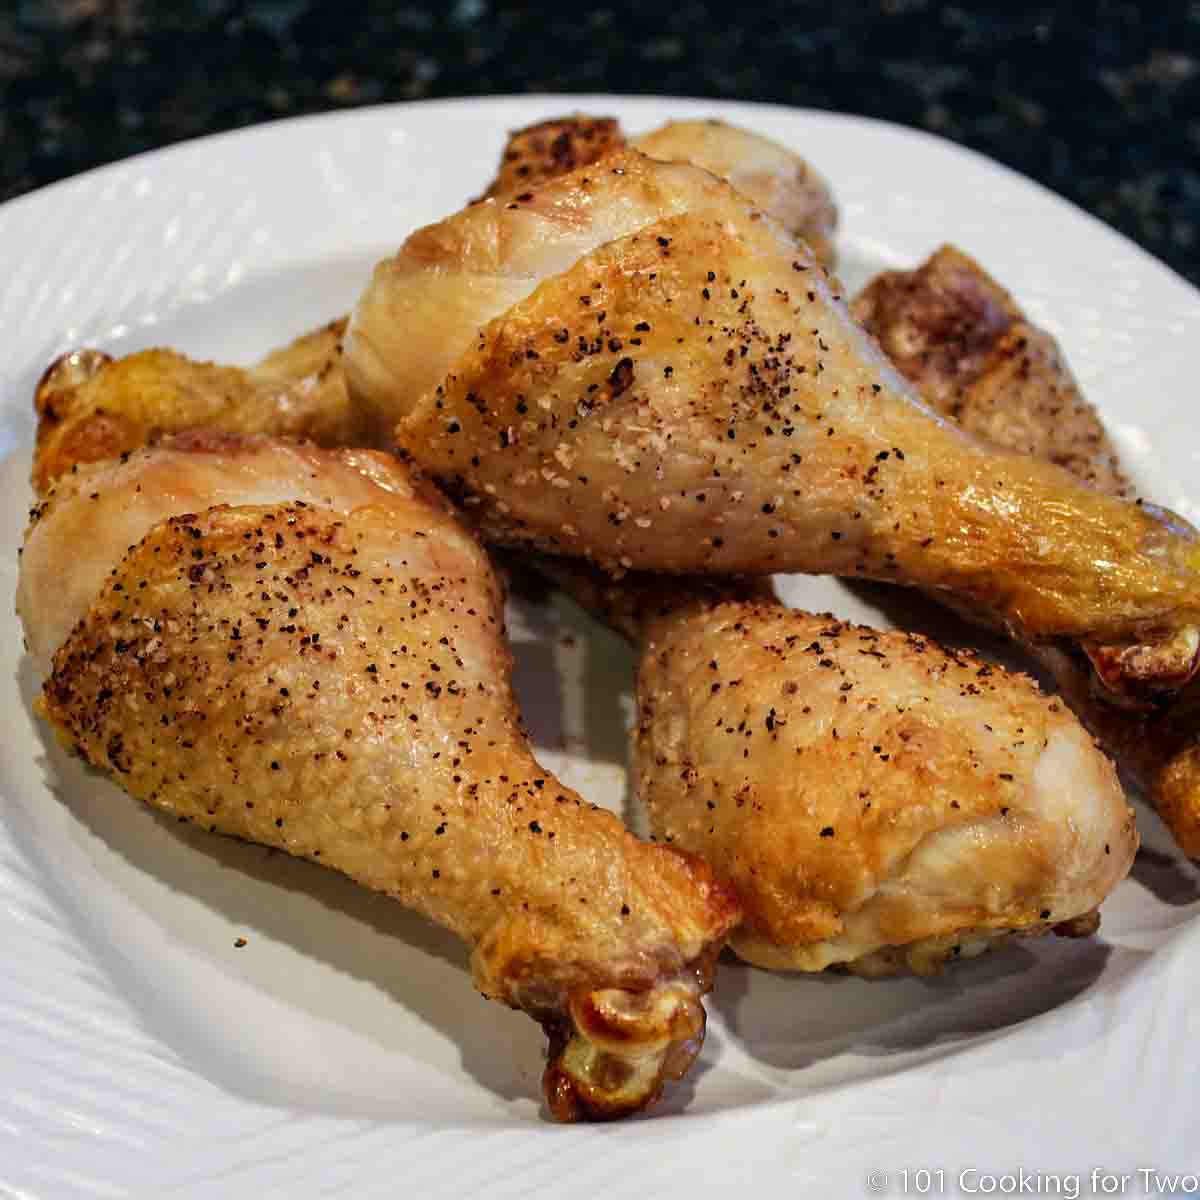 A pile of chicken legs on a white plate.